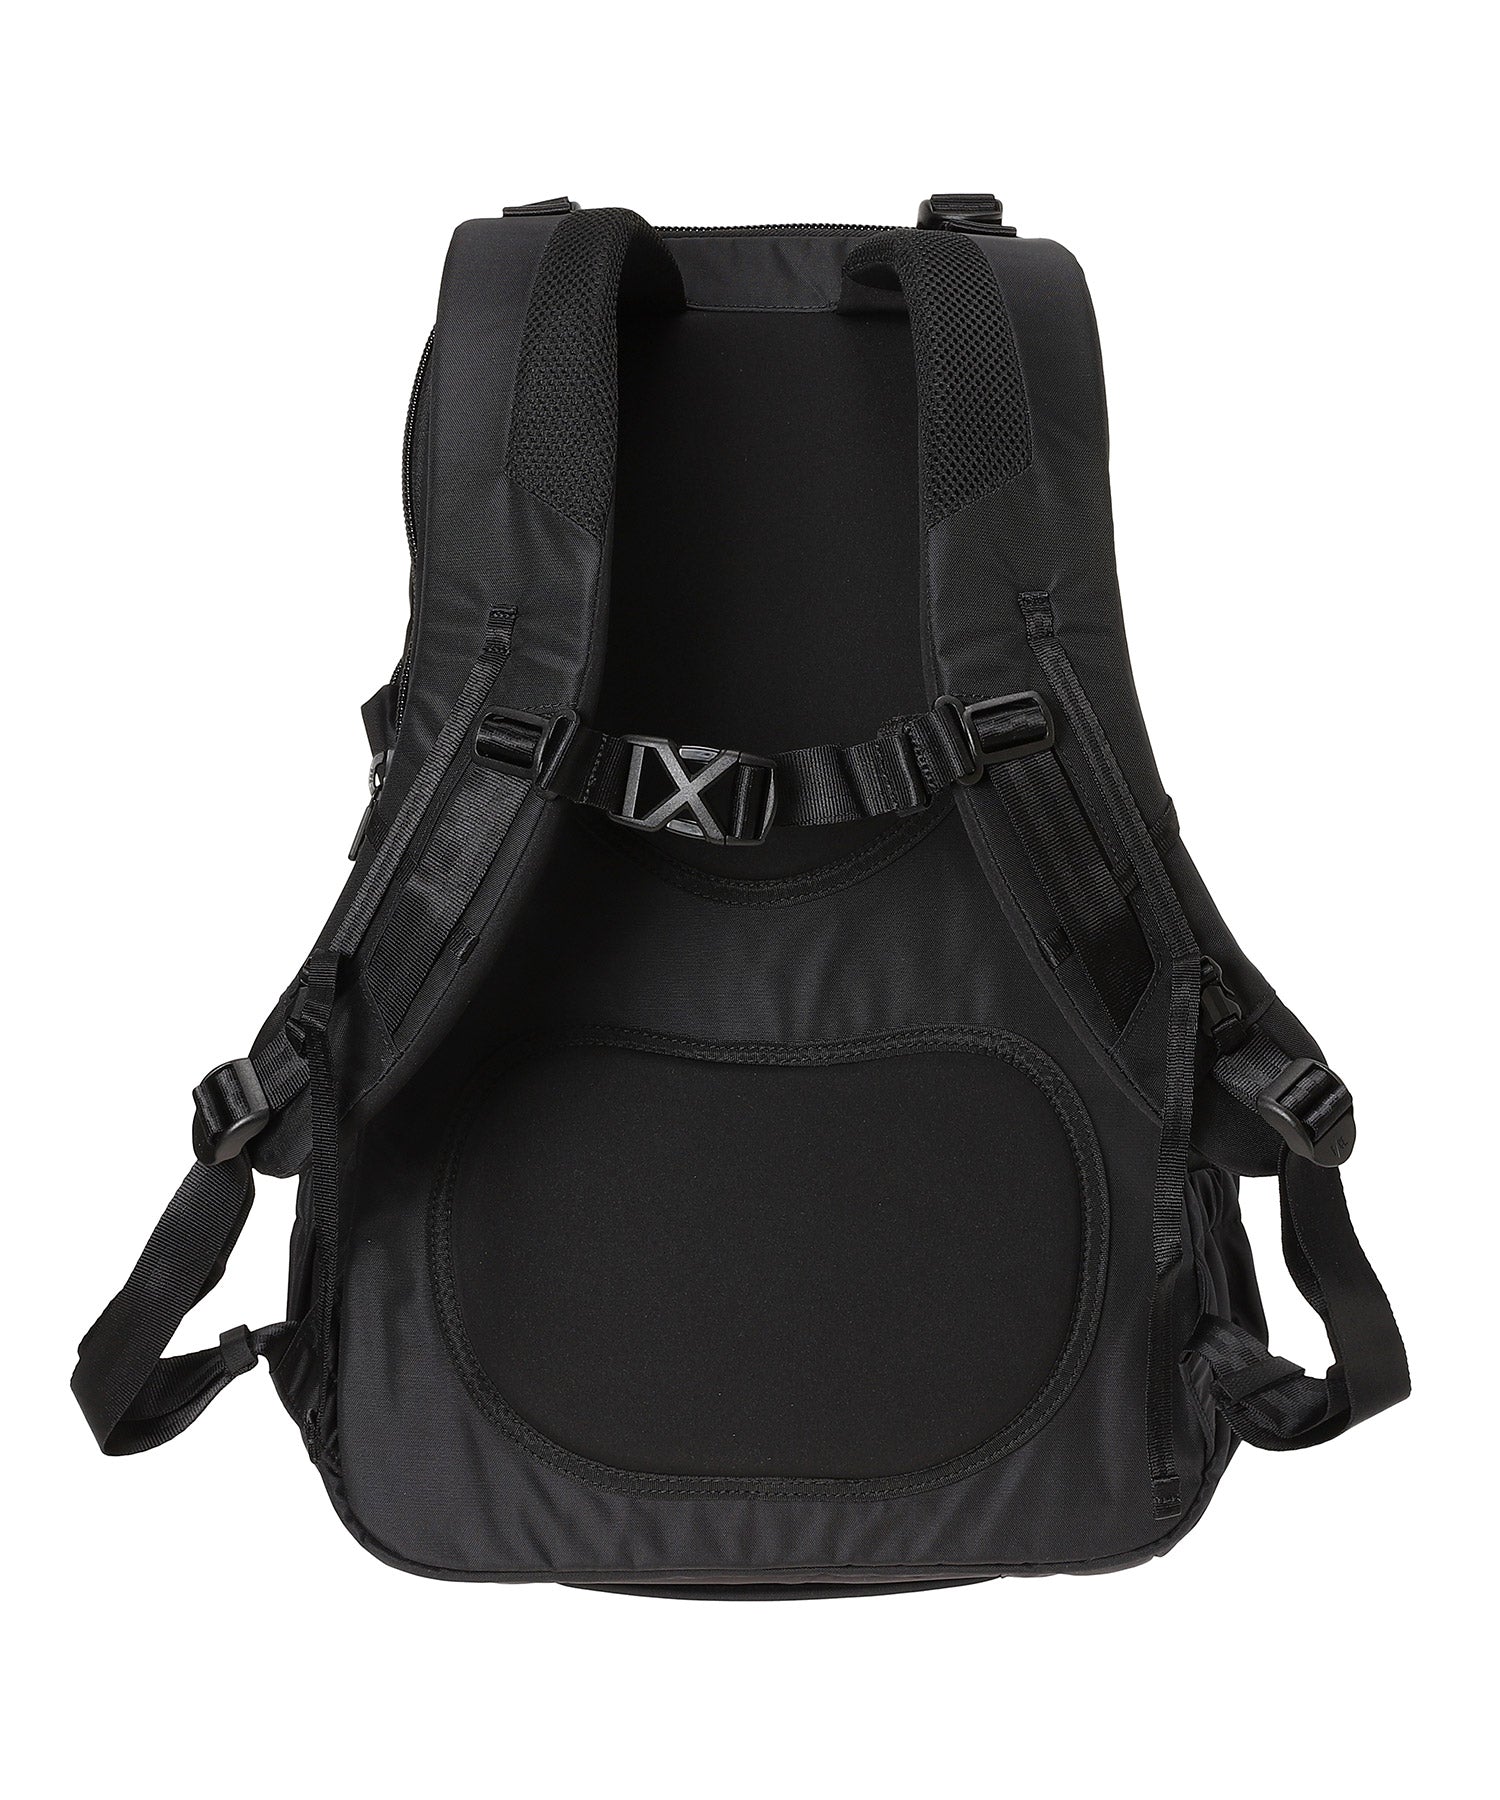 ONEDAY TECHNICAL TRAVEL BACK PACK